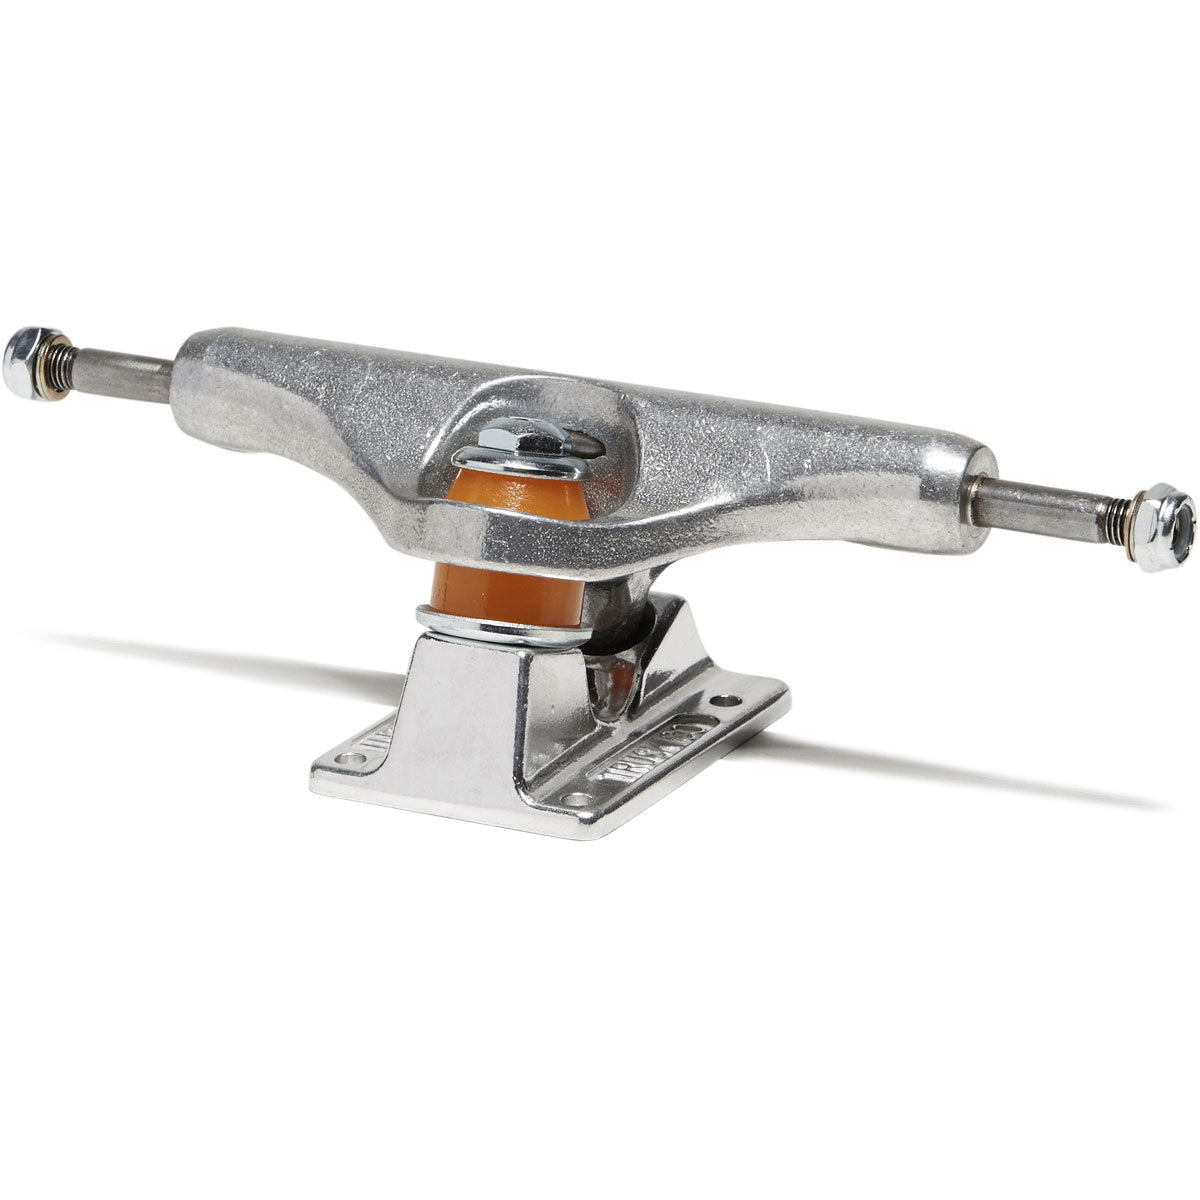 Independent Forged Hollow Mid Skateboard Trucks - 159mm image 2